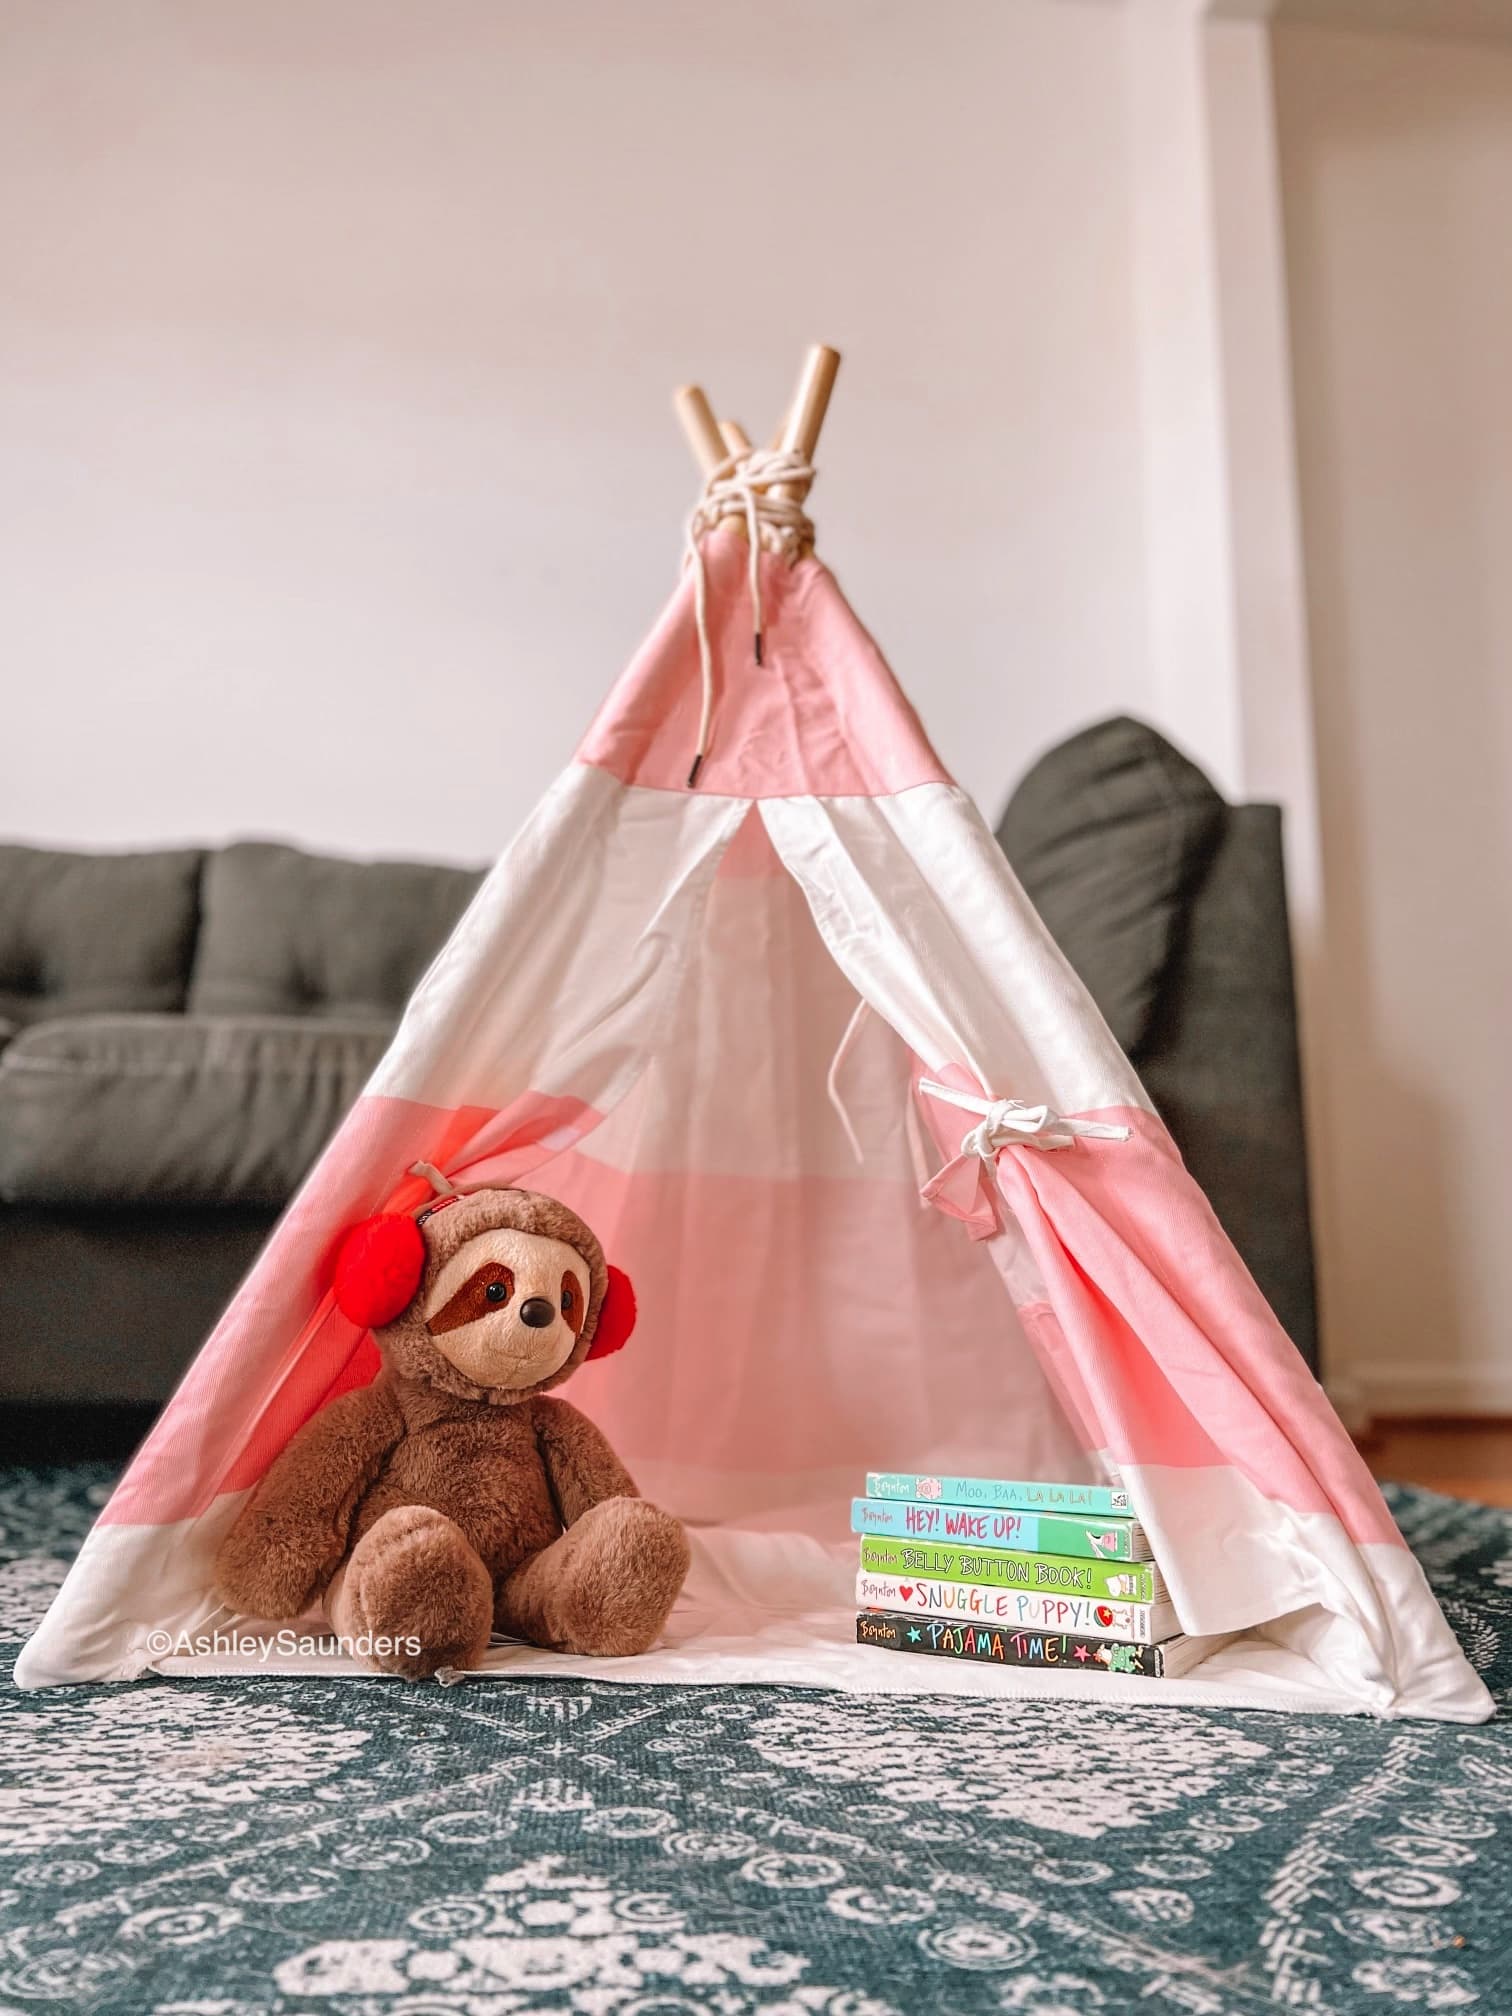 a mustard seed toys tent easter idea